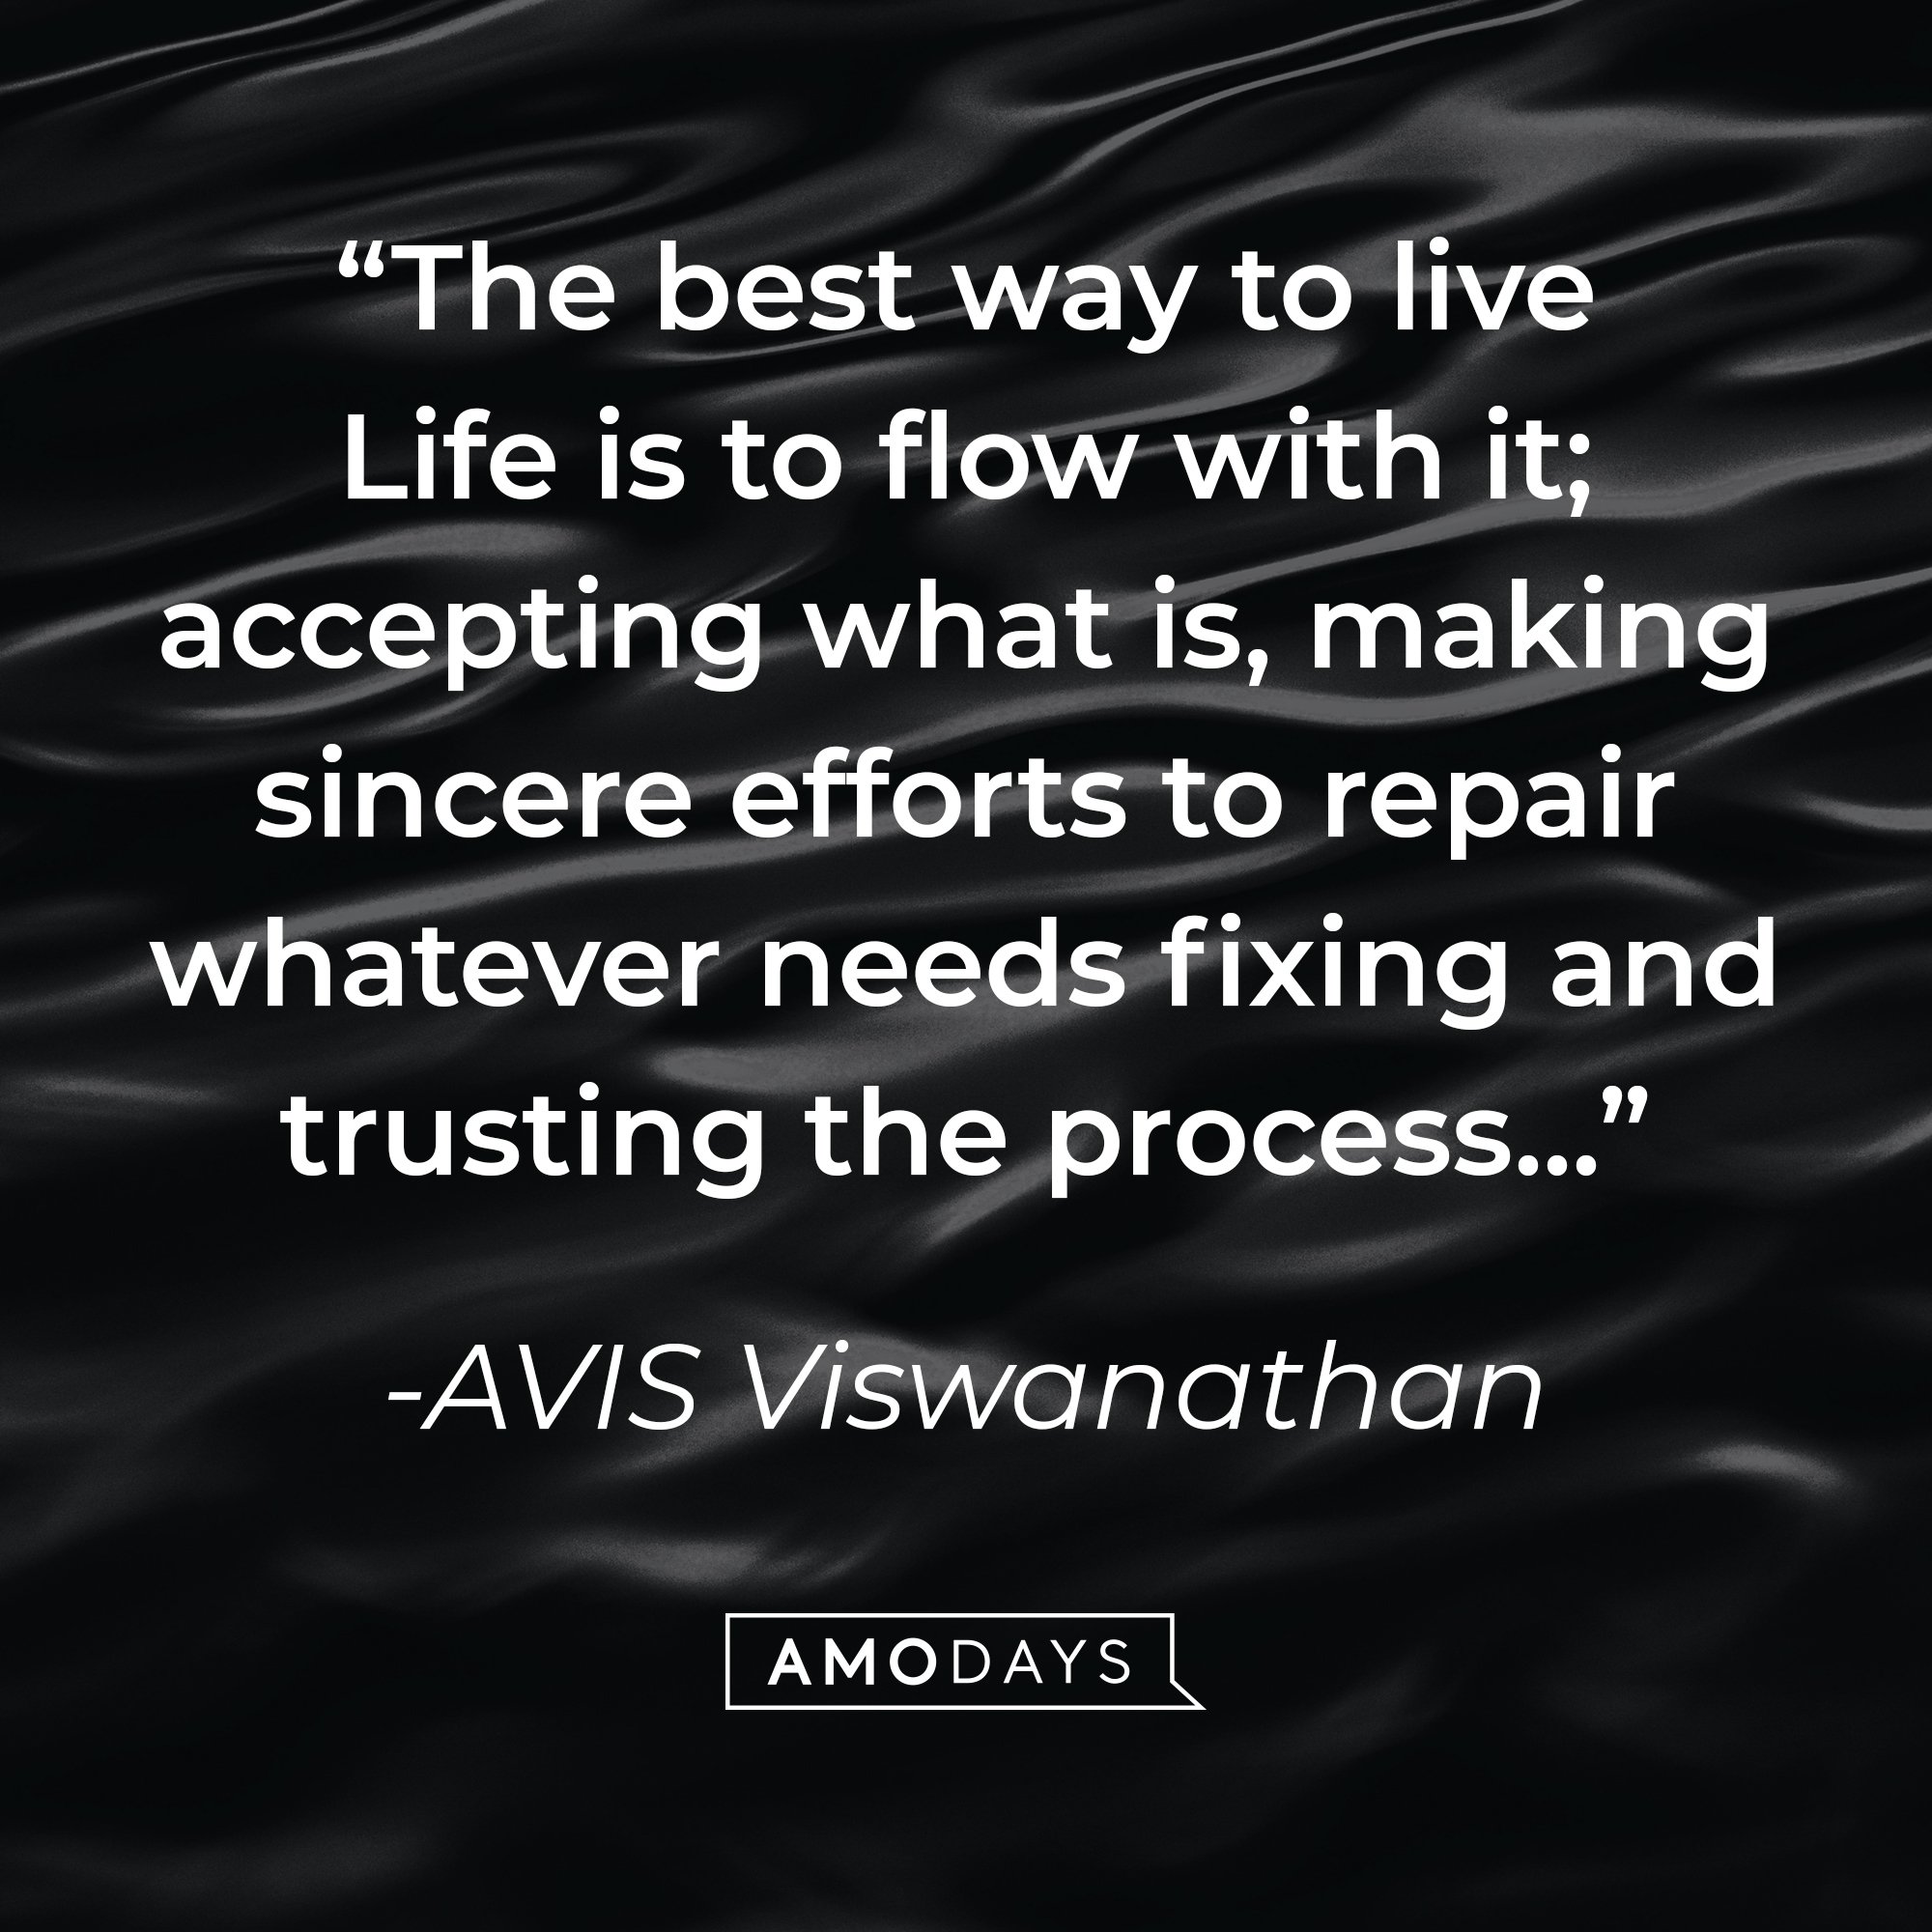 AVIS Viswanathan's quote: "The best way to live Life is to flow with it; accepting what is, making sincere efforts to repair whatever needs fixing and trusting the process..." | Image: AmoDays